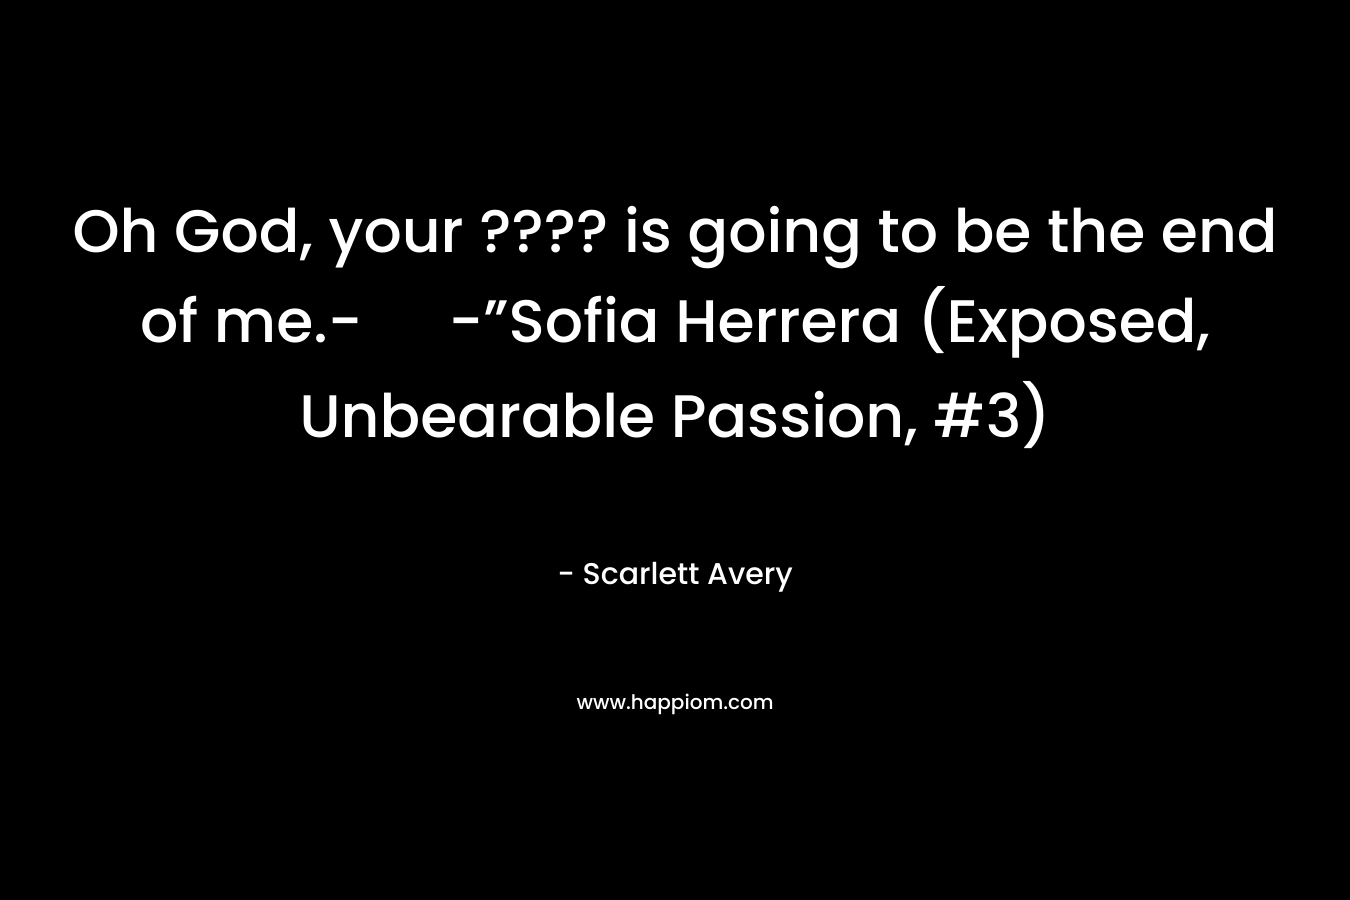 Oh God, your ???? is going to be the end of me.- -”Sofia Herrera (Exposed, Unbearable Passion, #3) – Scarlett Avery